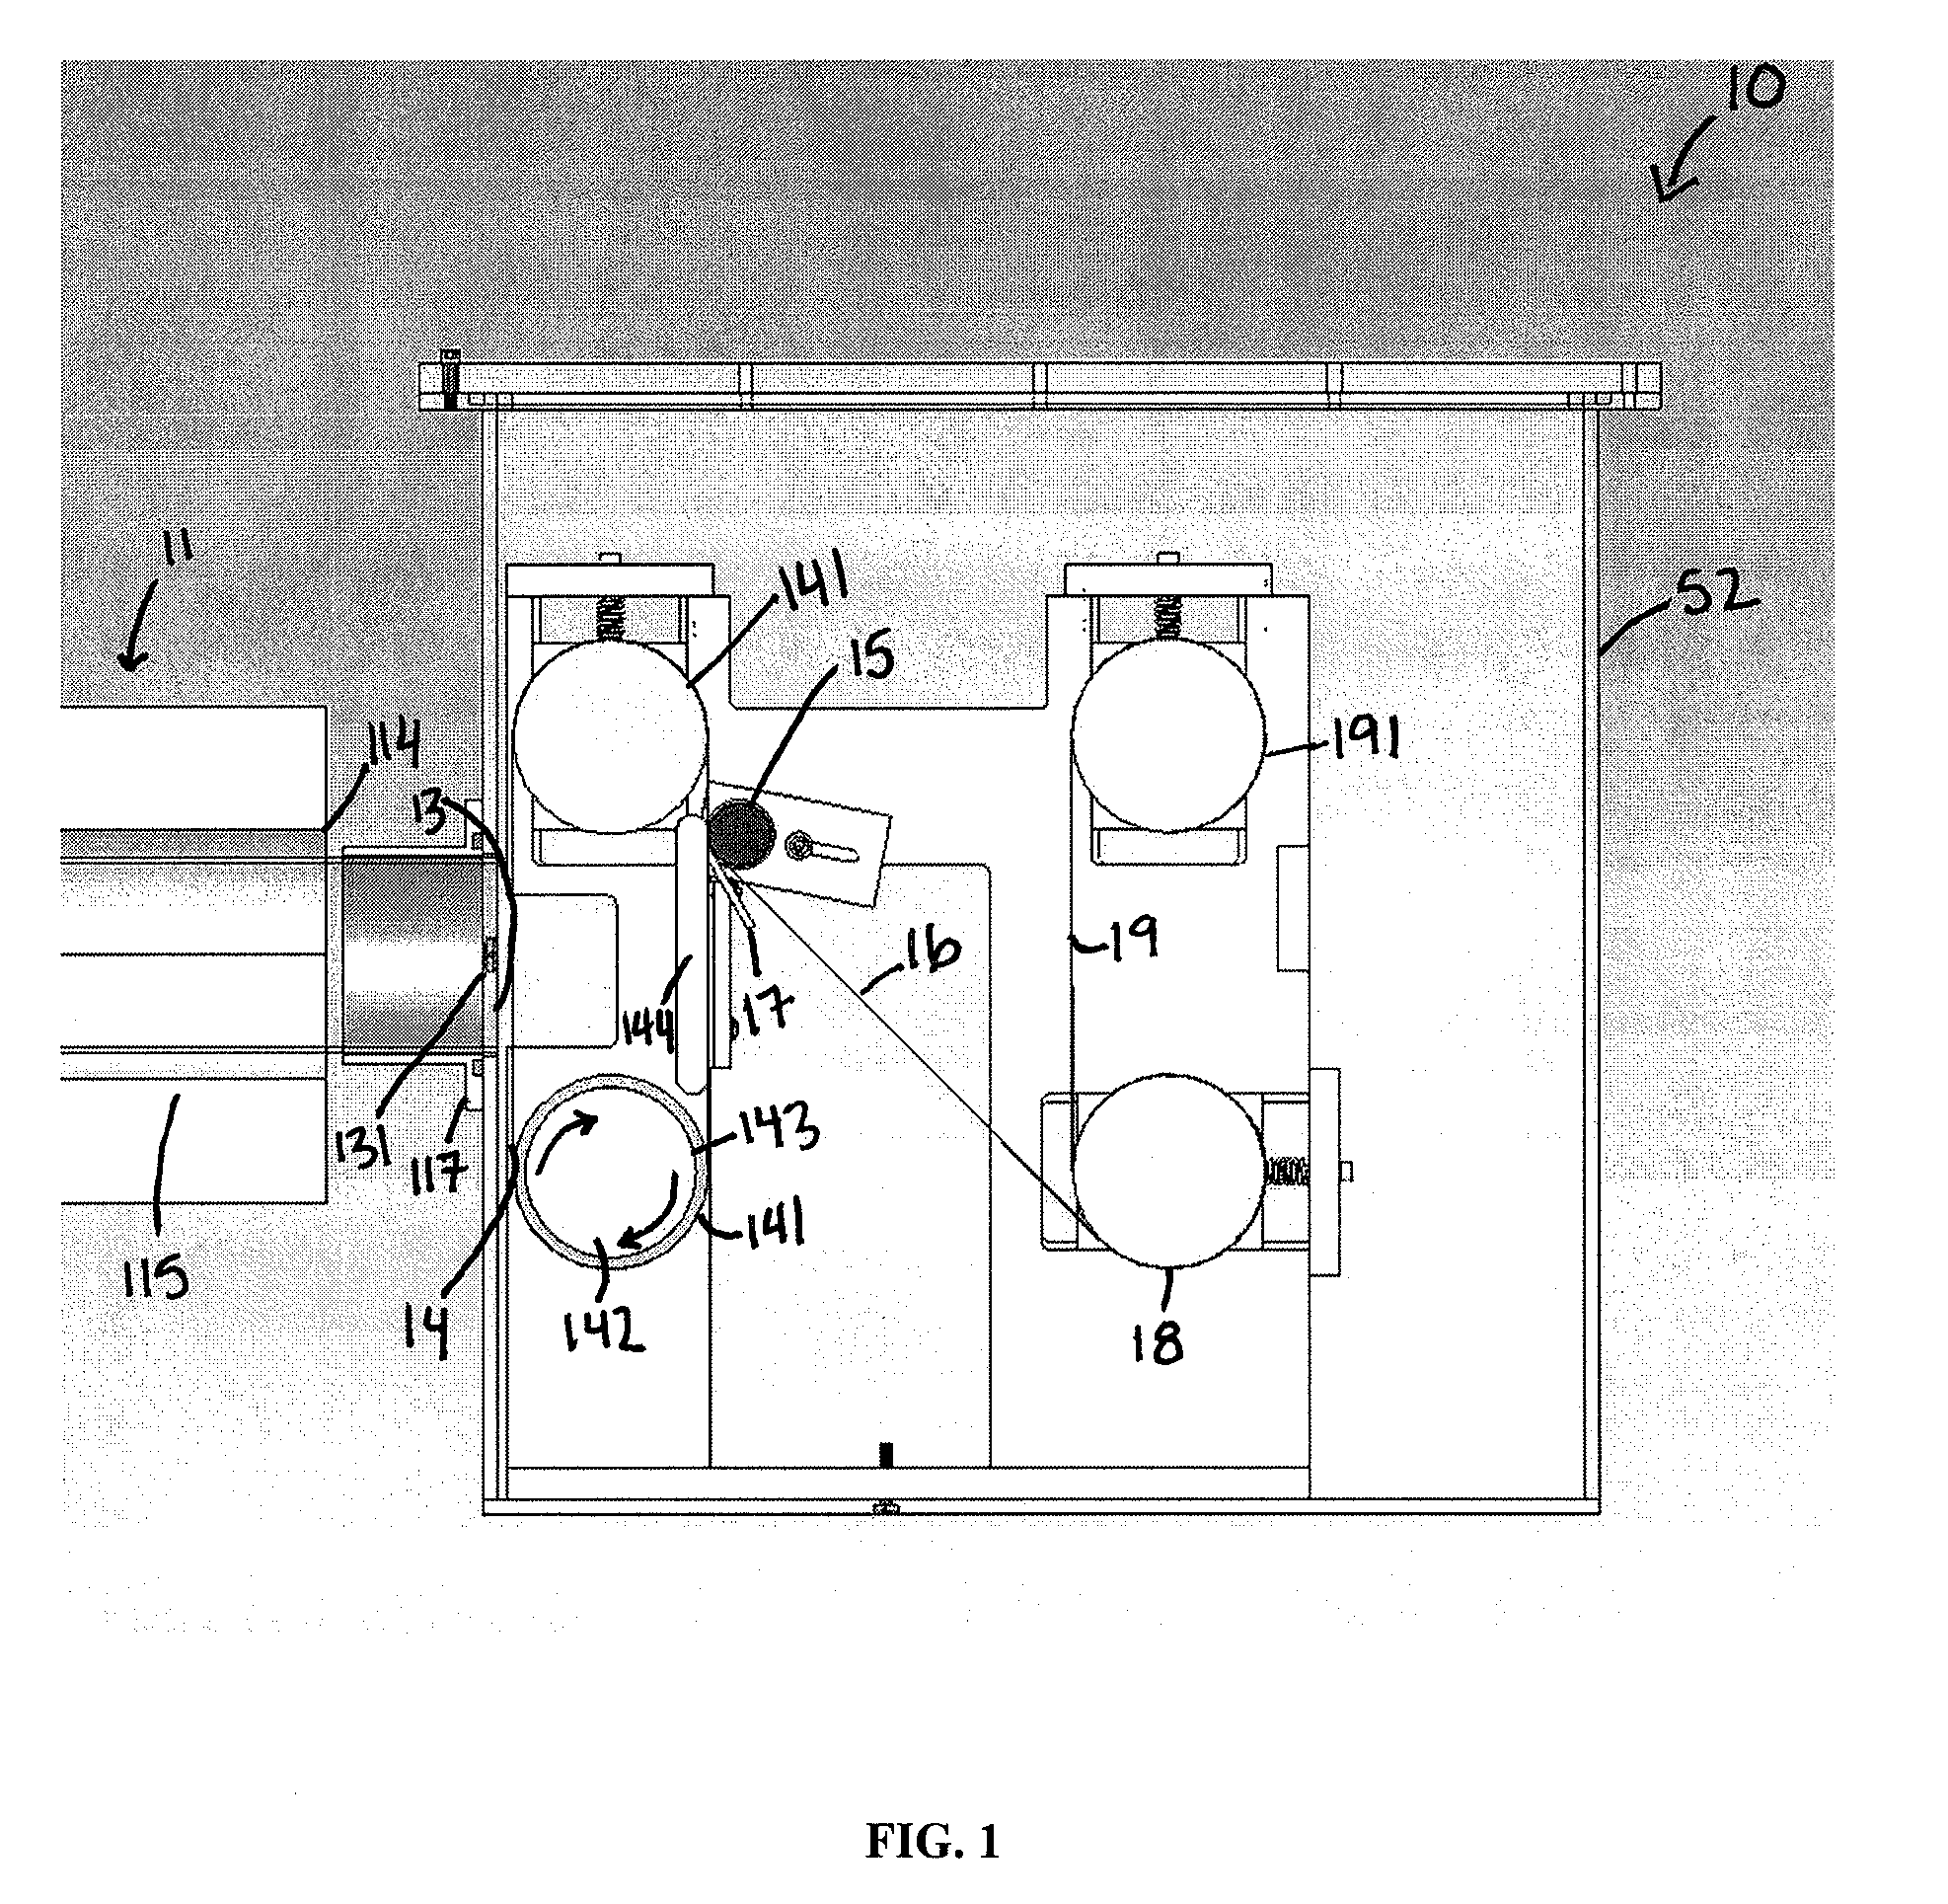 Materials for Thermal Protection and Methods of Manufacturing Same